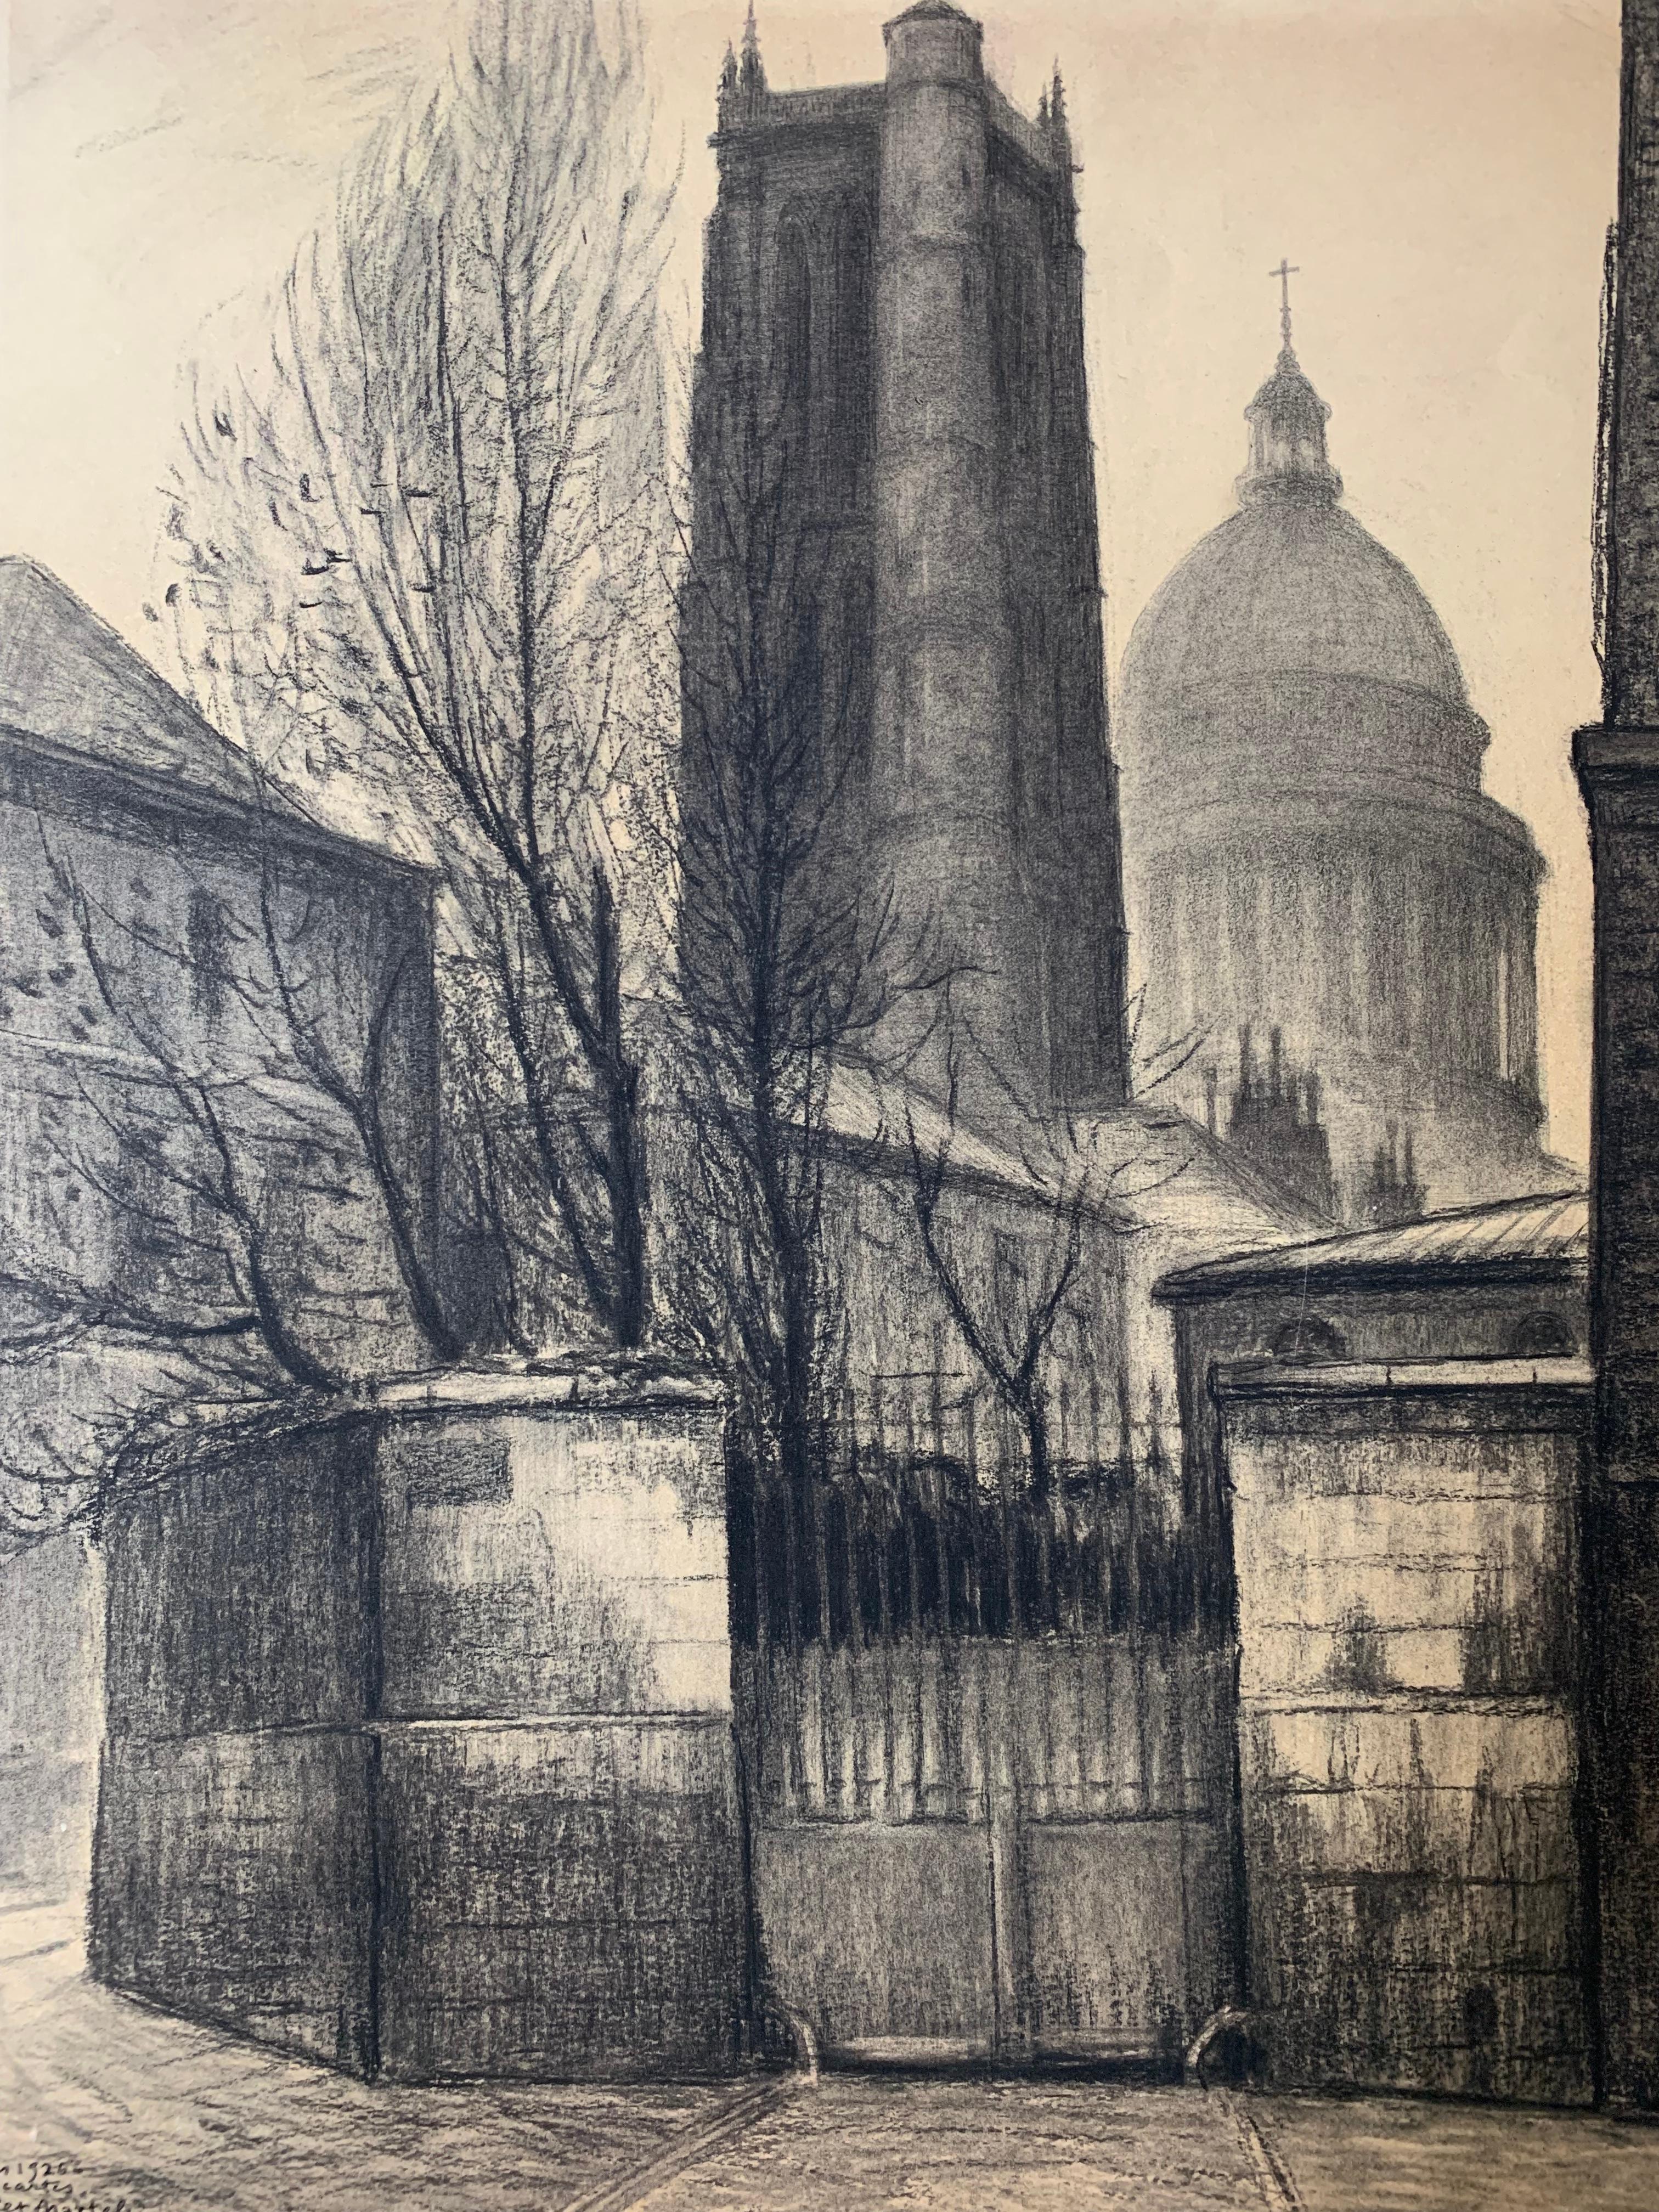 André MANTELET MARTEL (1876-1953)
View Of The Pantheon, Descartes street, Paris Ve area, 1926
Charcoal on paper
Signed, dated and located lower left
60 x 44 cm
Provenance; former Jacques and Colette Ulmann collection

Slight trace of sunstroke at